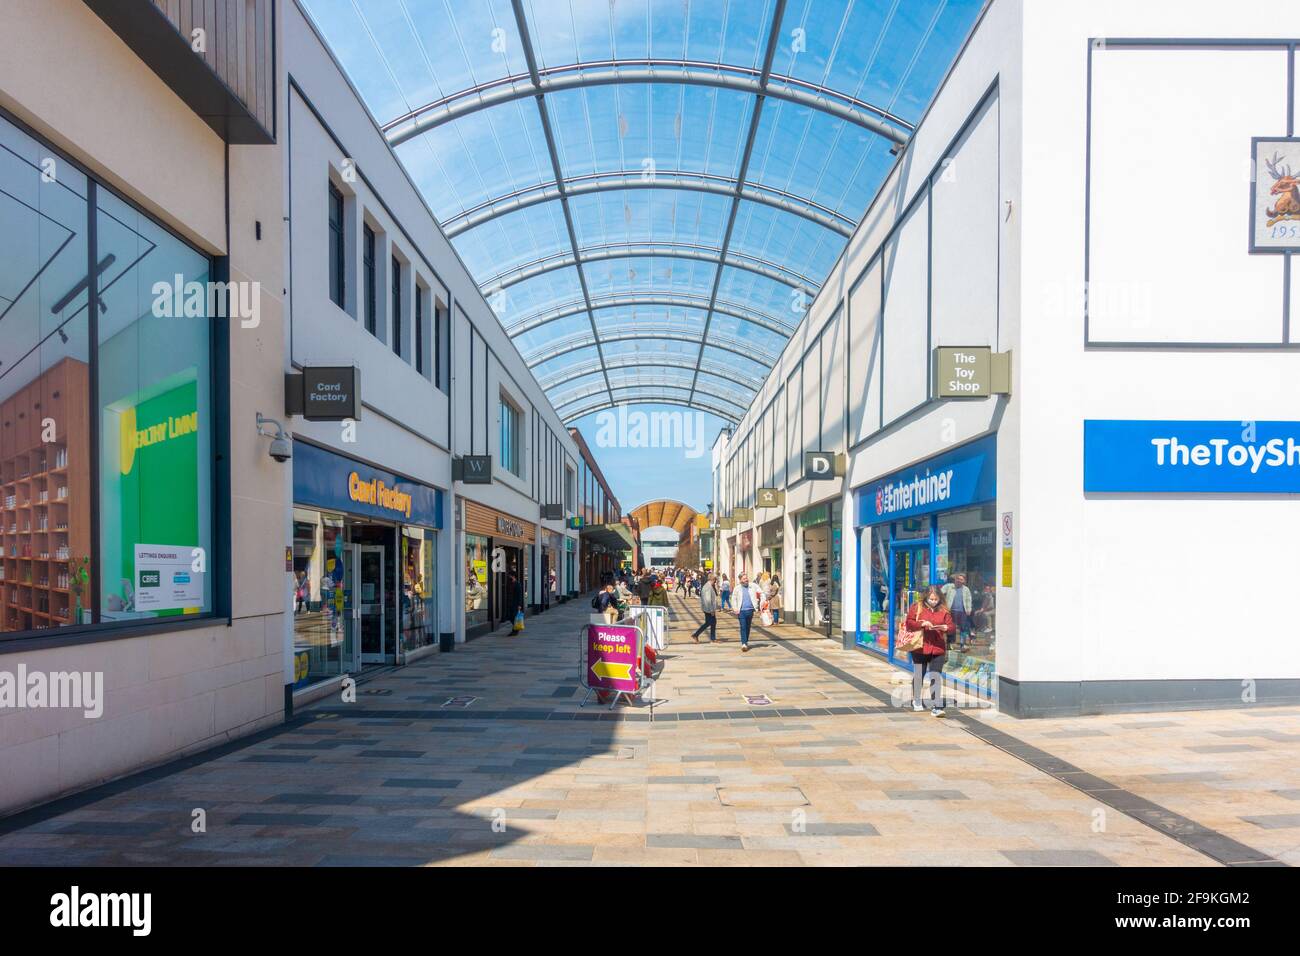 Shoppers in the Lexicon Shopping Centre in Bracknell. UK after shops have just opened following Covid lockdown restrictions being loosened. Stock Photo